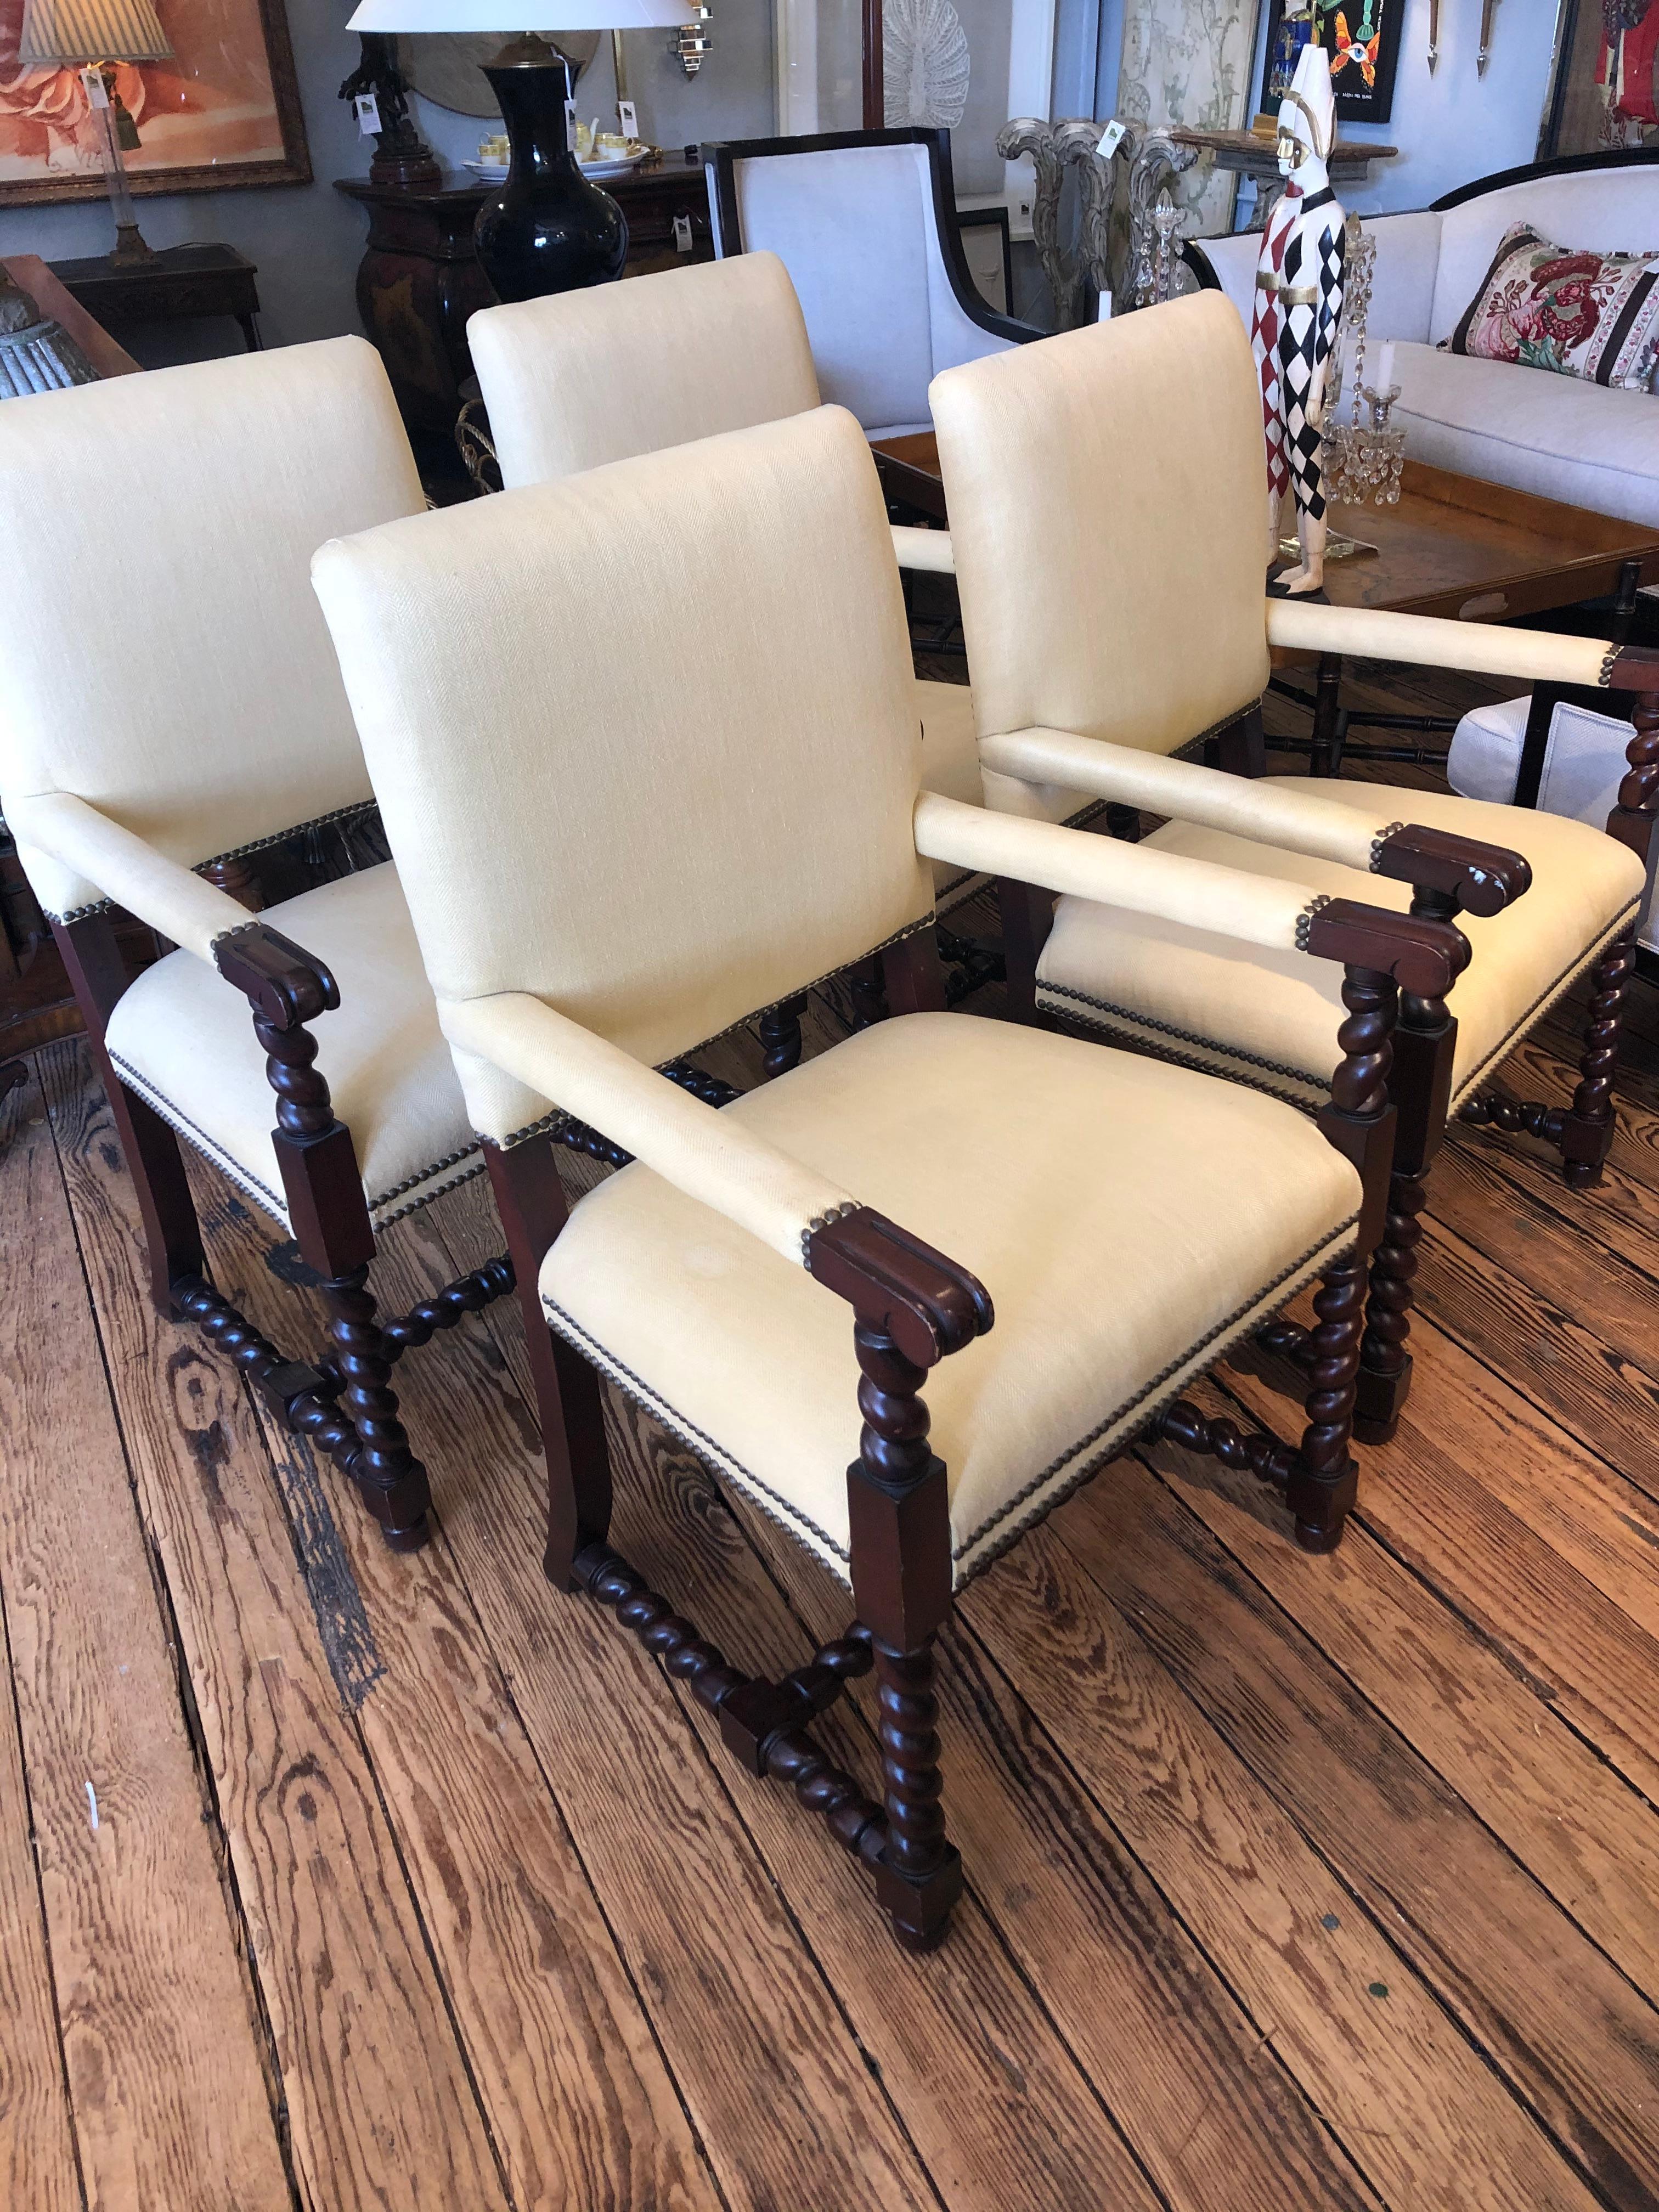 Classic set of 4 Tudor style mahogany armchairs having pale yellow silk upholstery, barley twist arm supports, legs and stretchers and brass nailhead trim. Comfortable and solid chairs, but could use updated upholstery.
Great as large dining